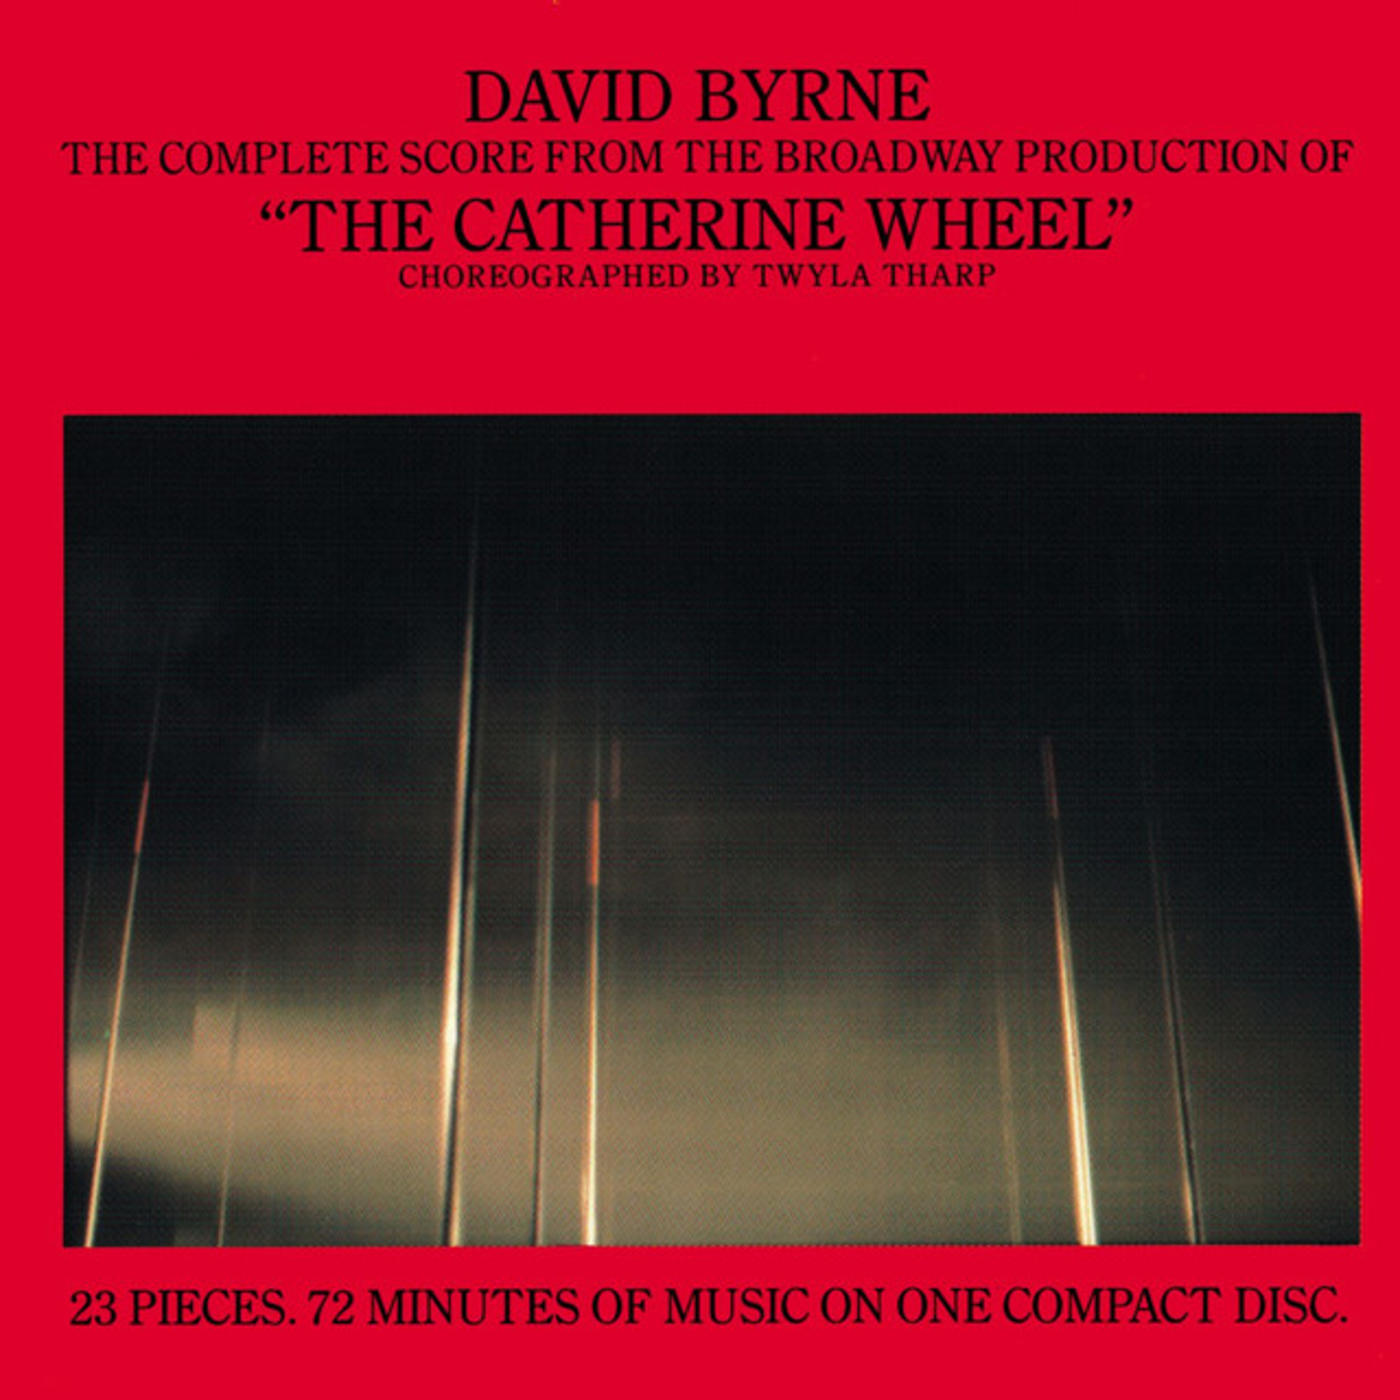 The Complete Score From "The Catherine Wheel"